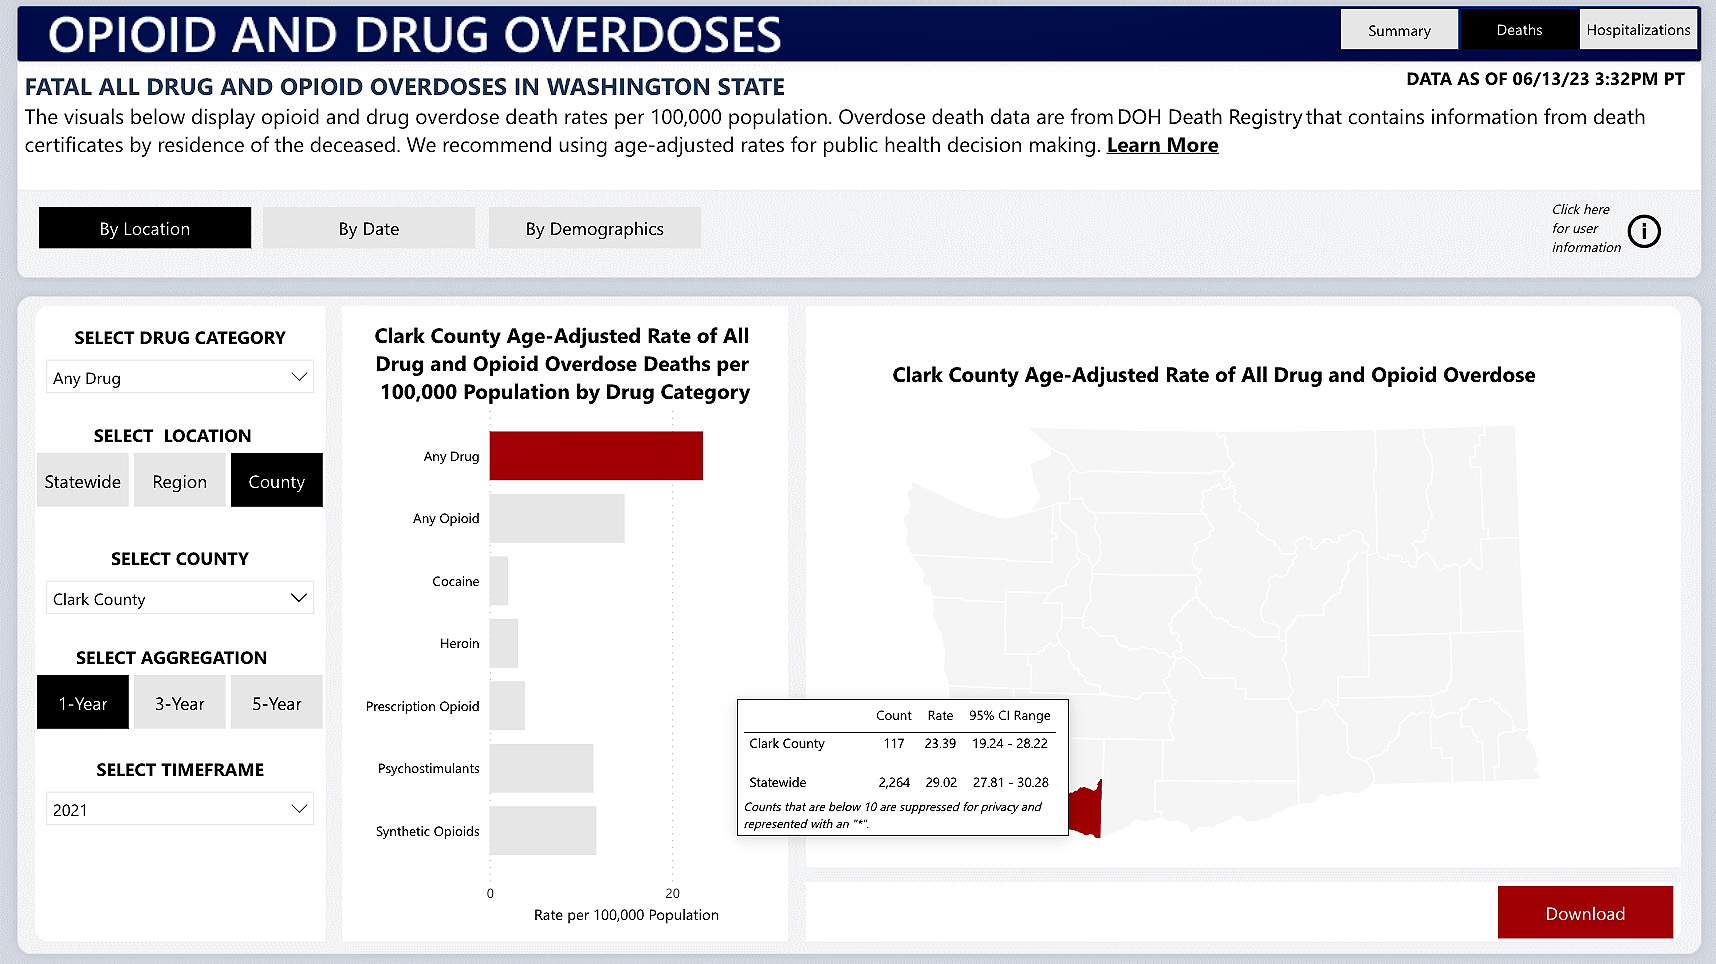 Screen shot from https://doh.wa.gov/data-and-statistical-reports/washington-tracking-network-wtn/opioids/overdose-dashboard